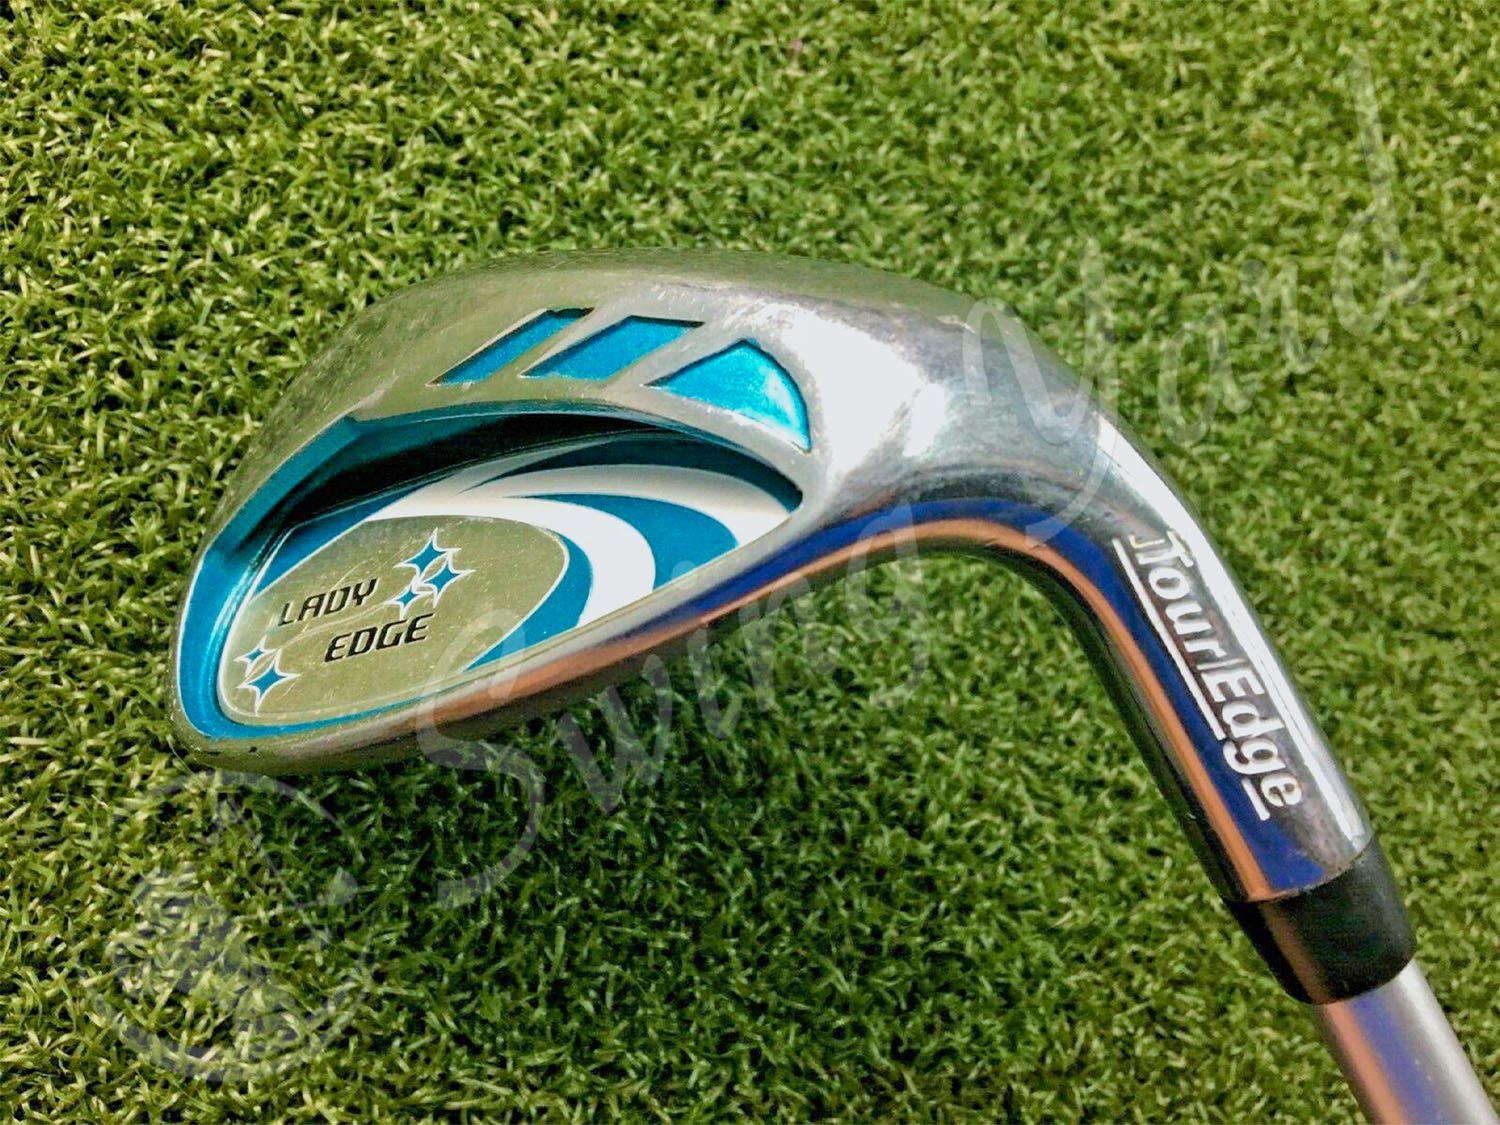 A Tour Edge Lady Edge sand wedge in the grass